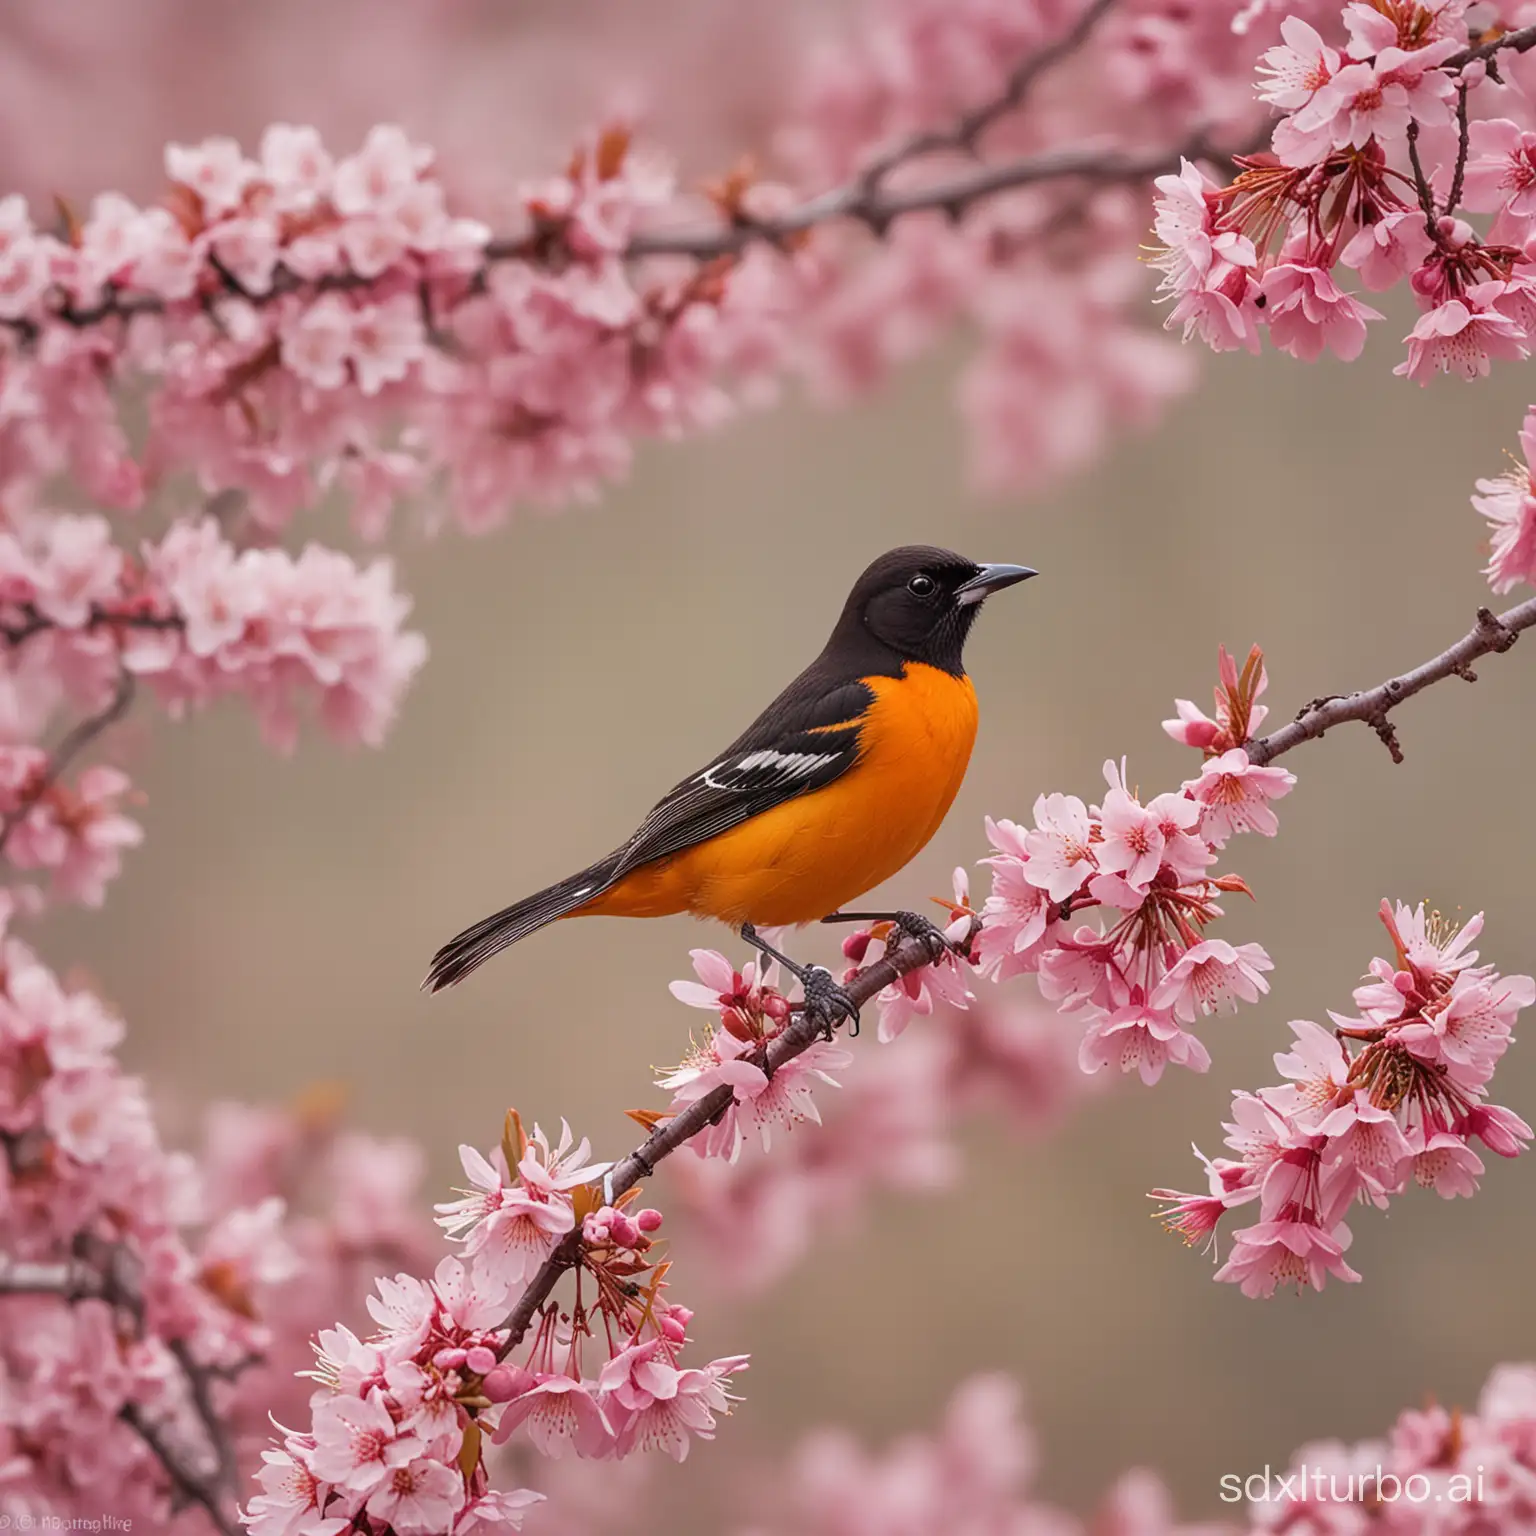 Bright orange orioles perched amongst radiant pink cherry blossoms as new grass emerges in a landscape undergoing spring renewal, rebirth, avian life, seasonal change, cherry trees in bloom, nature's ephemeral beauty, Fuji X-T4, macro lens, close-up blossom perspective, --style raw --stylize 150 --ar 4:3 --v 6